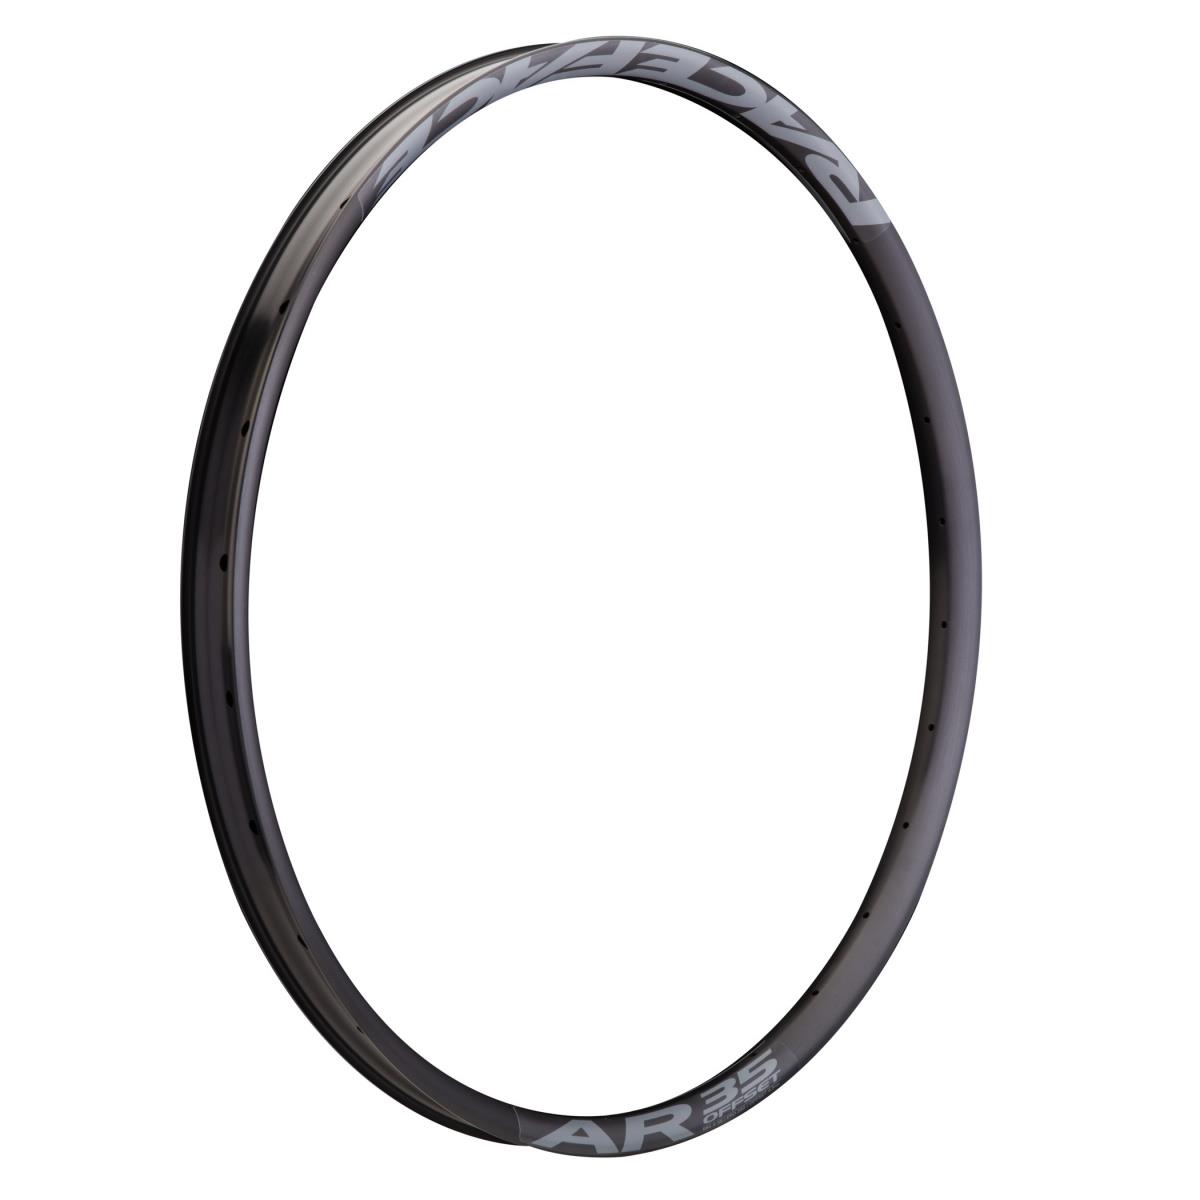 Race Face Jante MTB Ar Offset 35 Black/Grey, 27.5 Inches x 35 mm